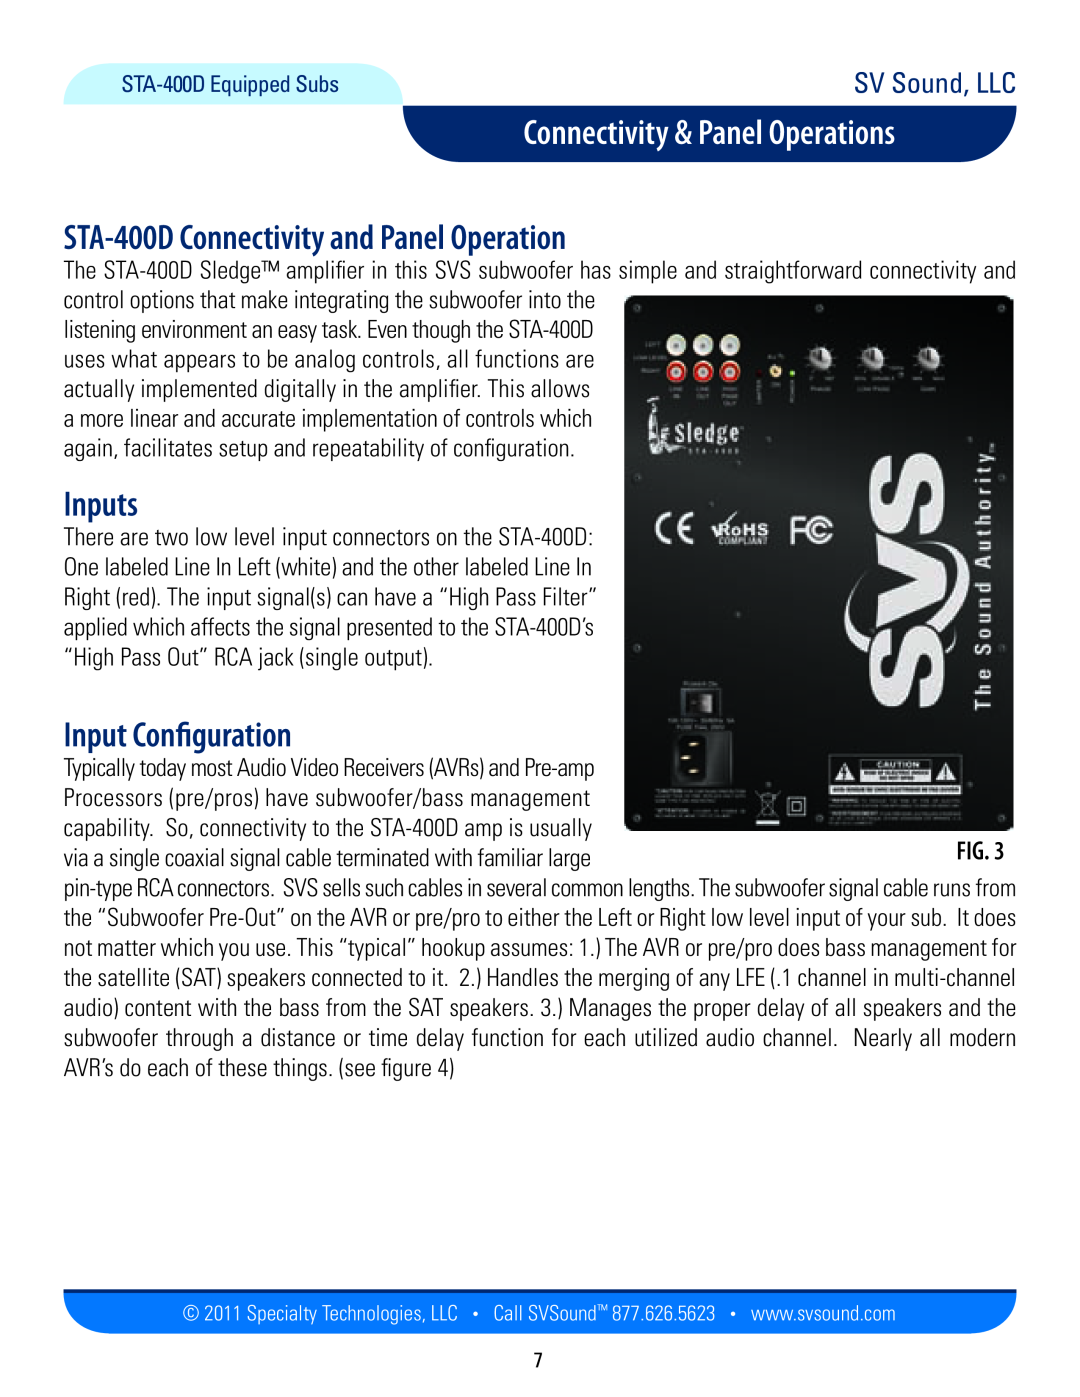 SV Sound PB12-NSD STA-400DConnectivity and Panel Operation, Inputs, Input Configuration, Connectivity & Panel Operations 